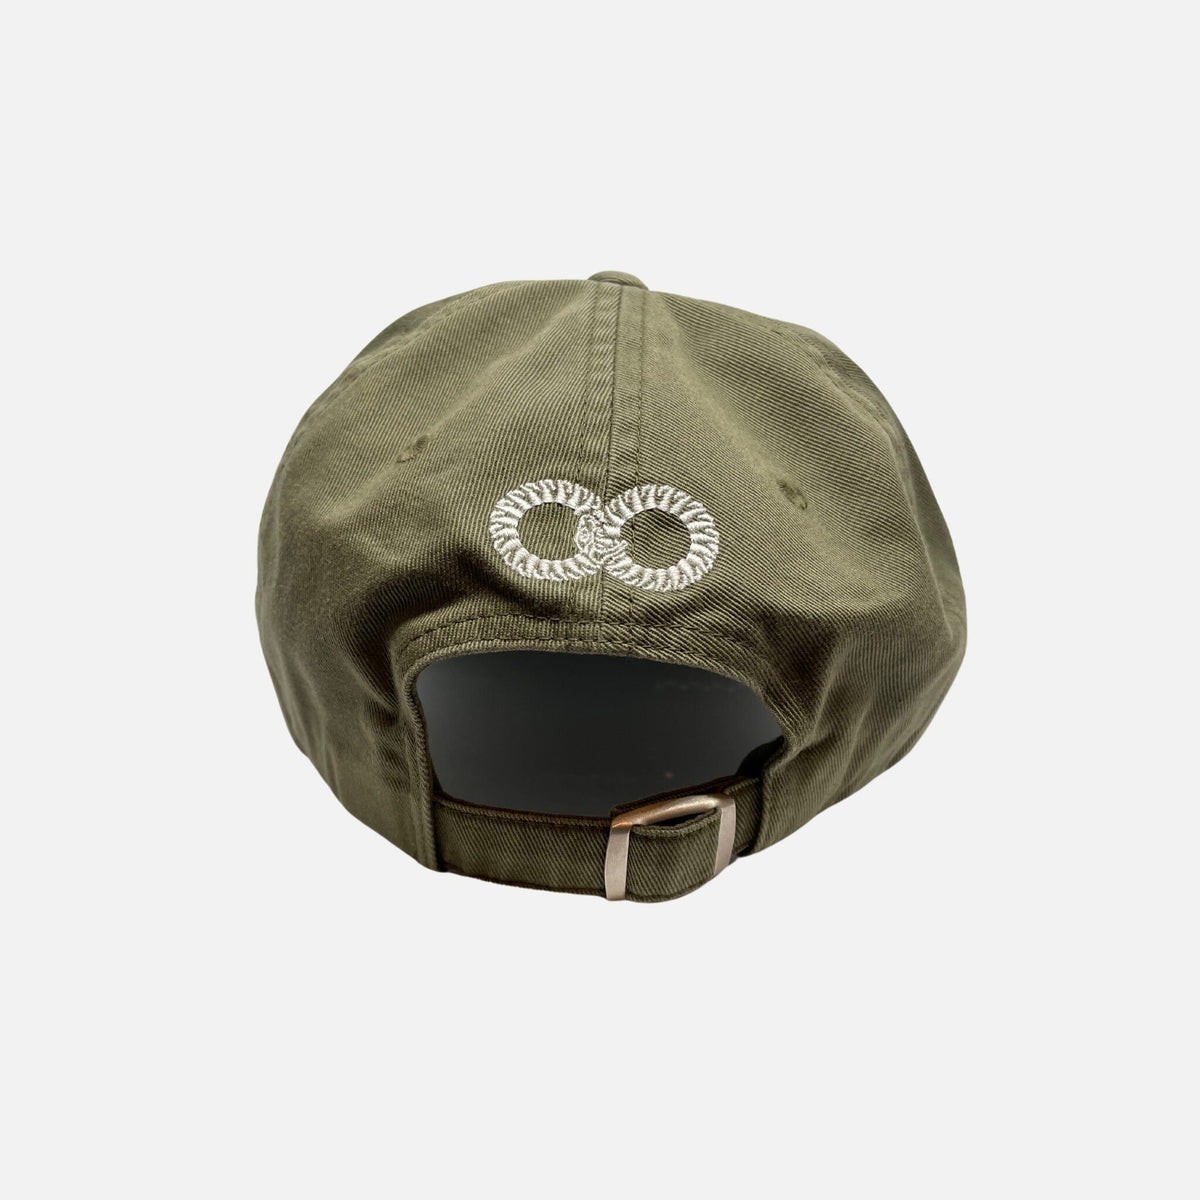 Childe Dad Cap - Pale Army Green